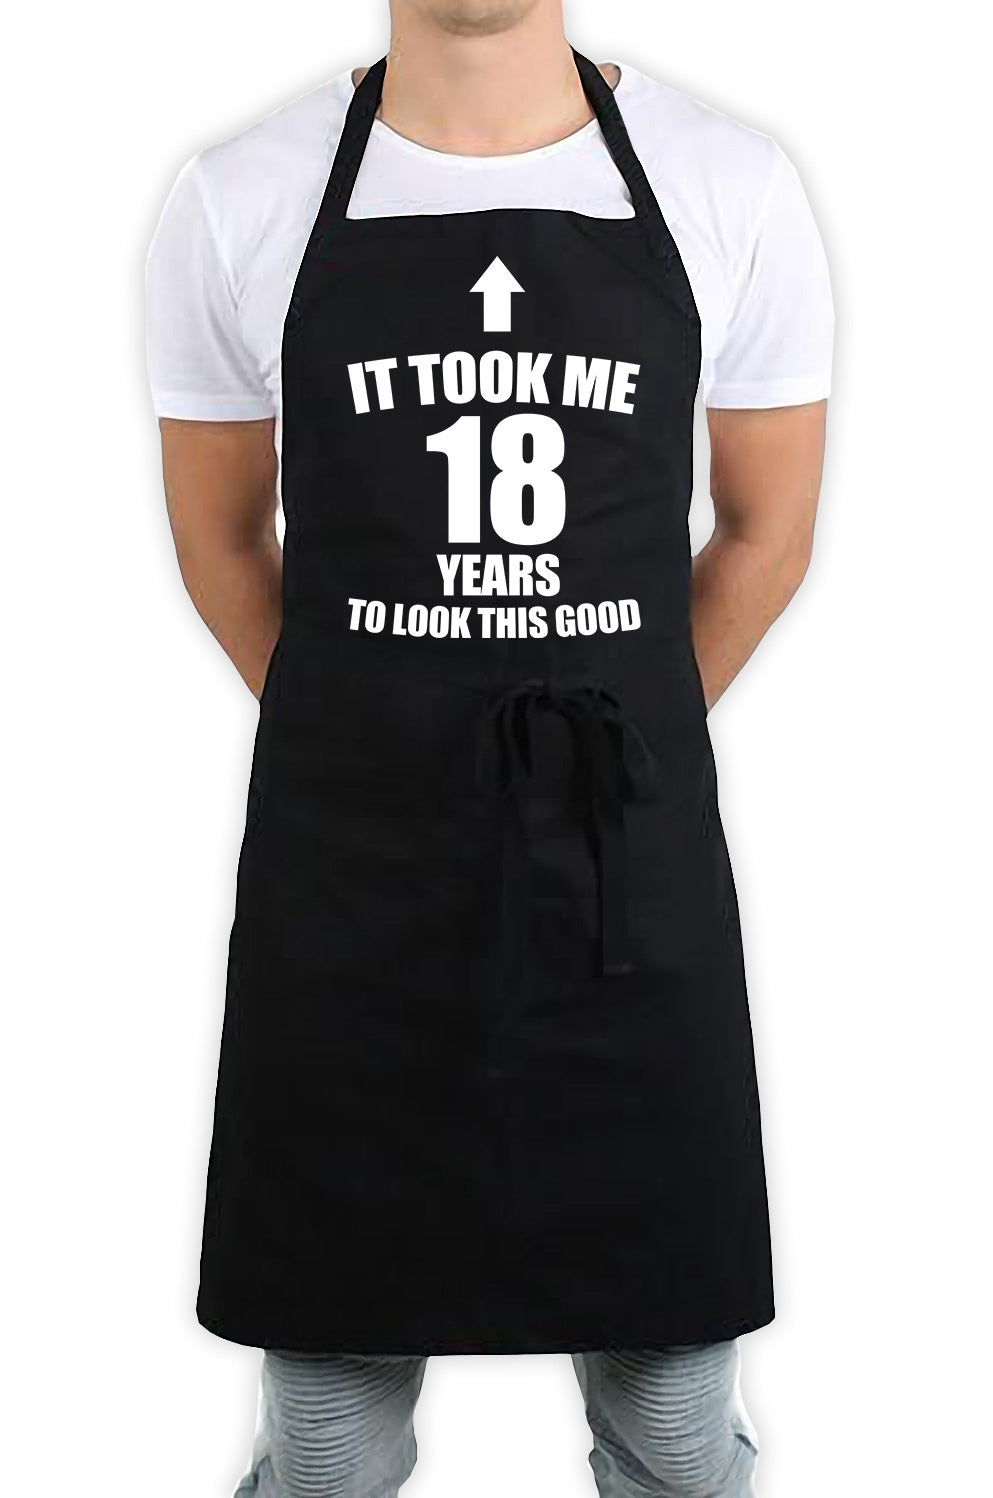 It Took Me 18 Years To Look This Good Funny Kitchen BBQ Apron Black